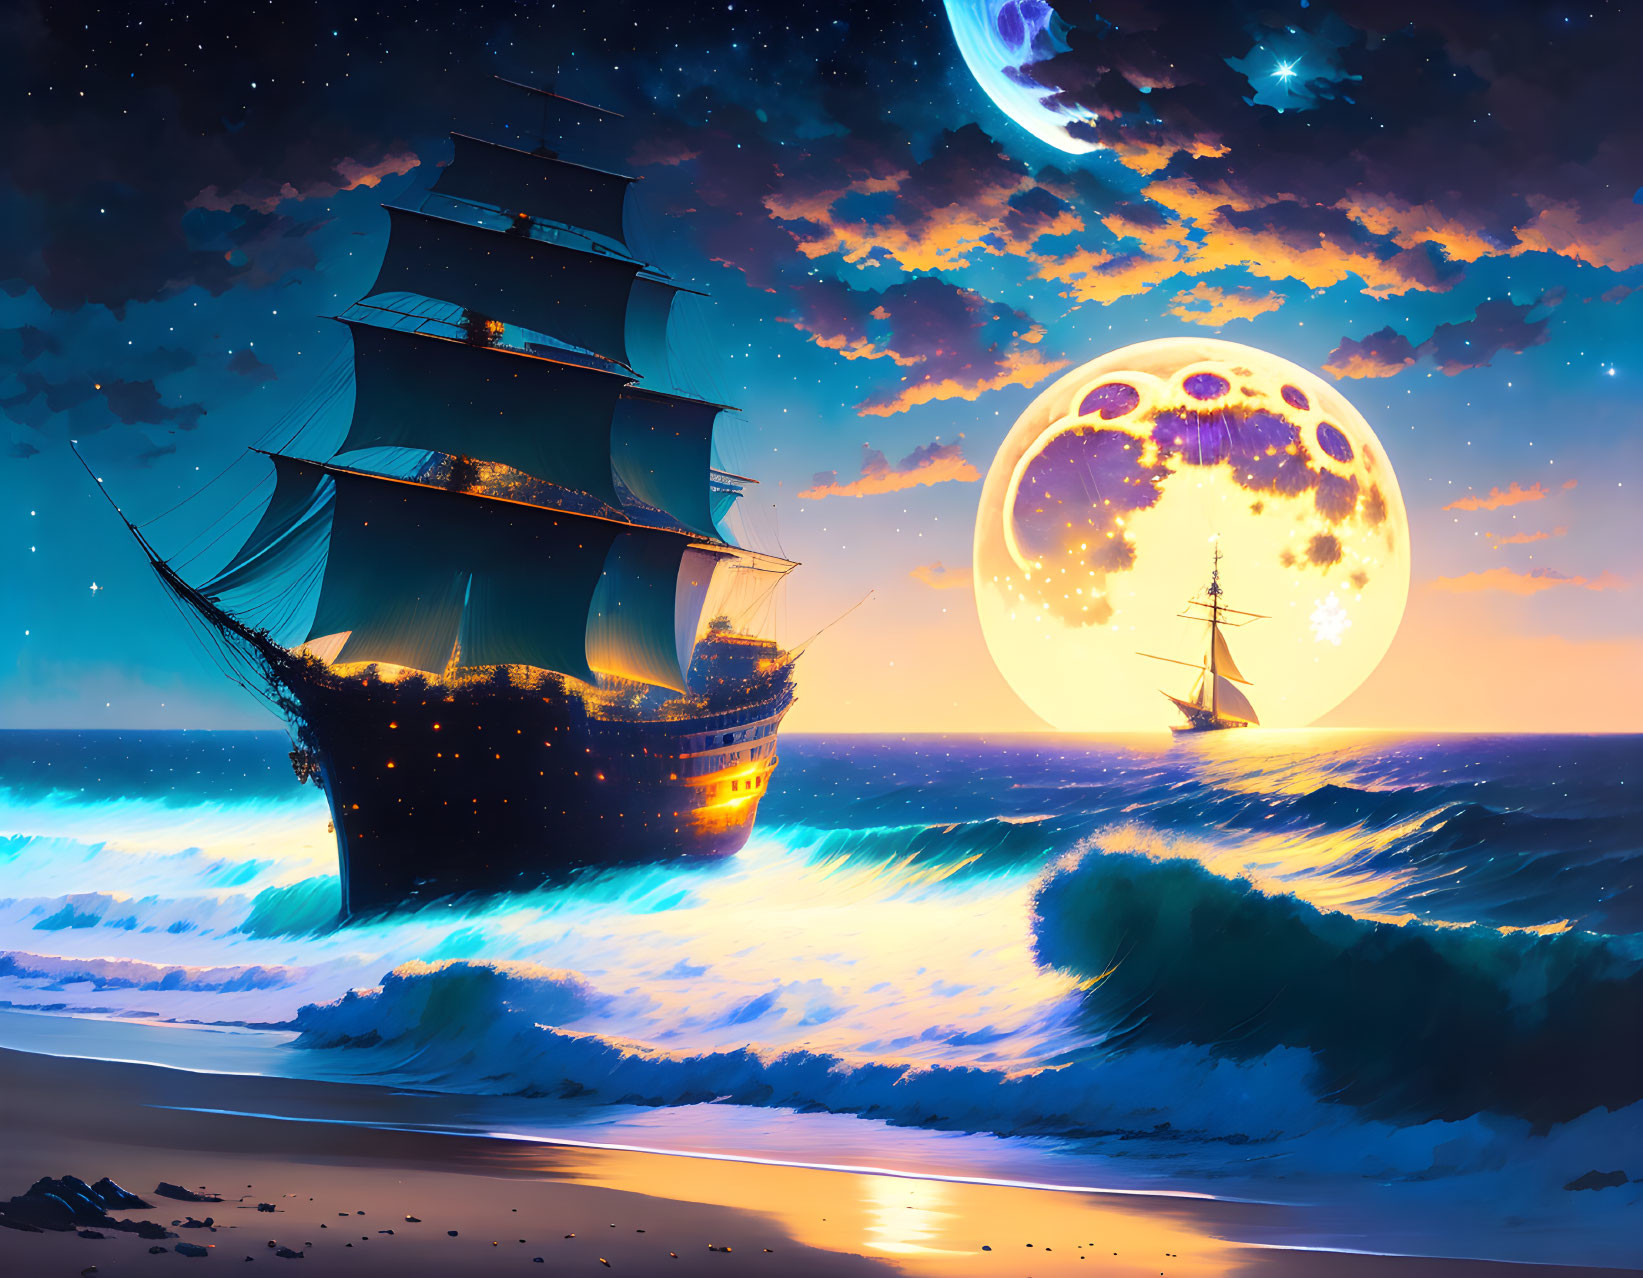 Fantasy ocean scene with sailing ships, starry night sky, colorful clouds, and two moons